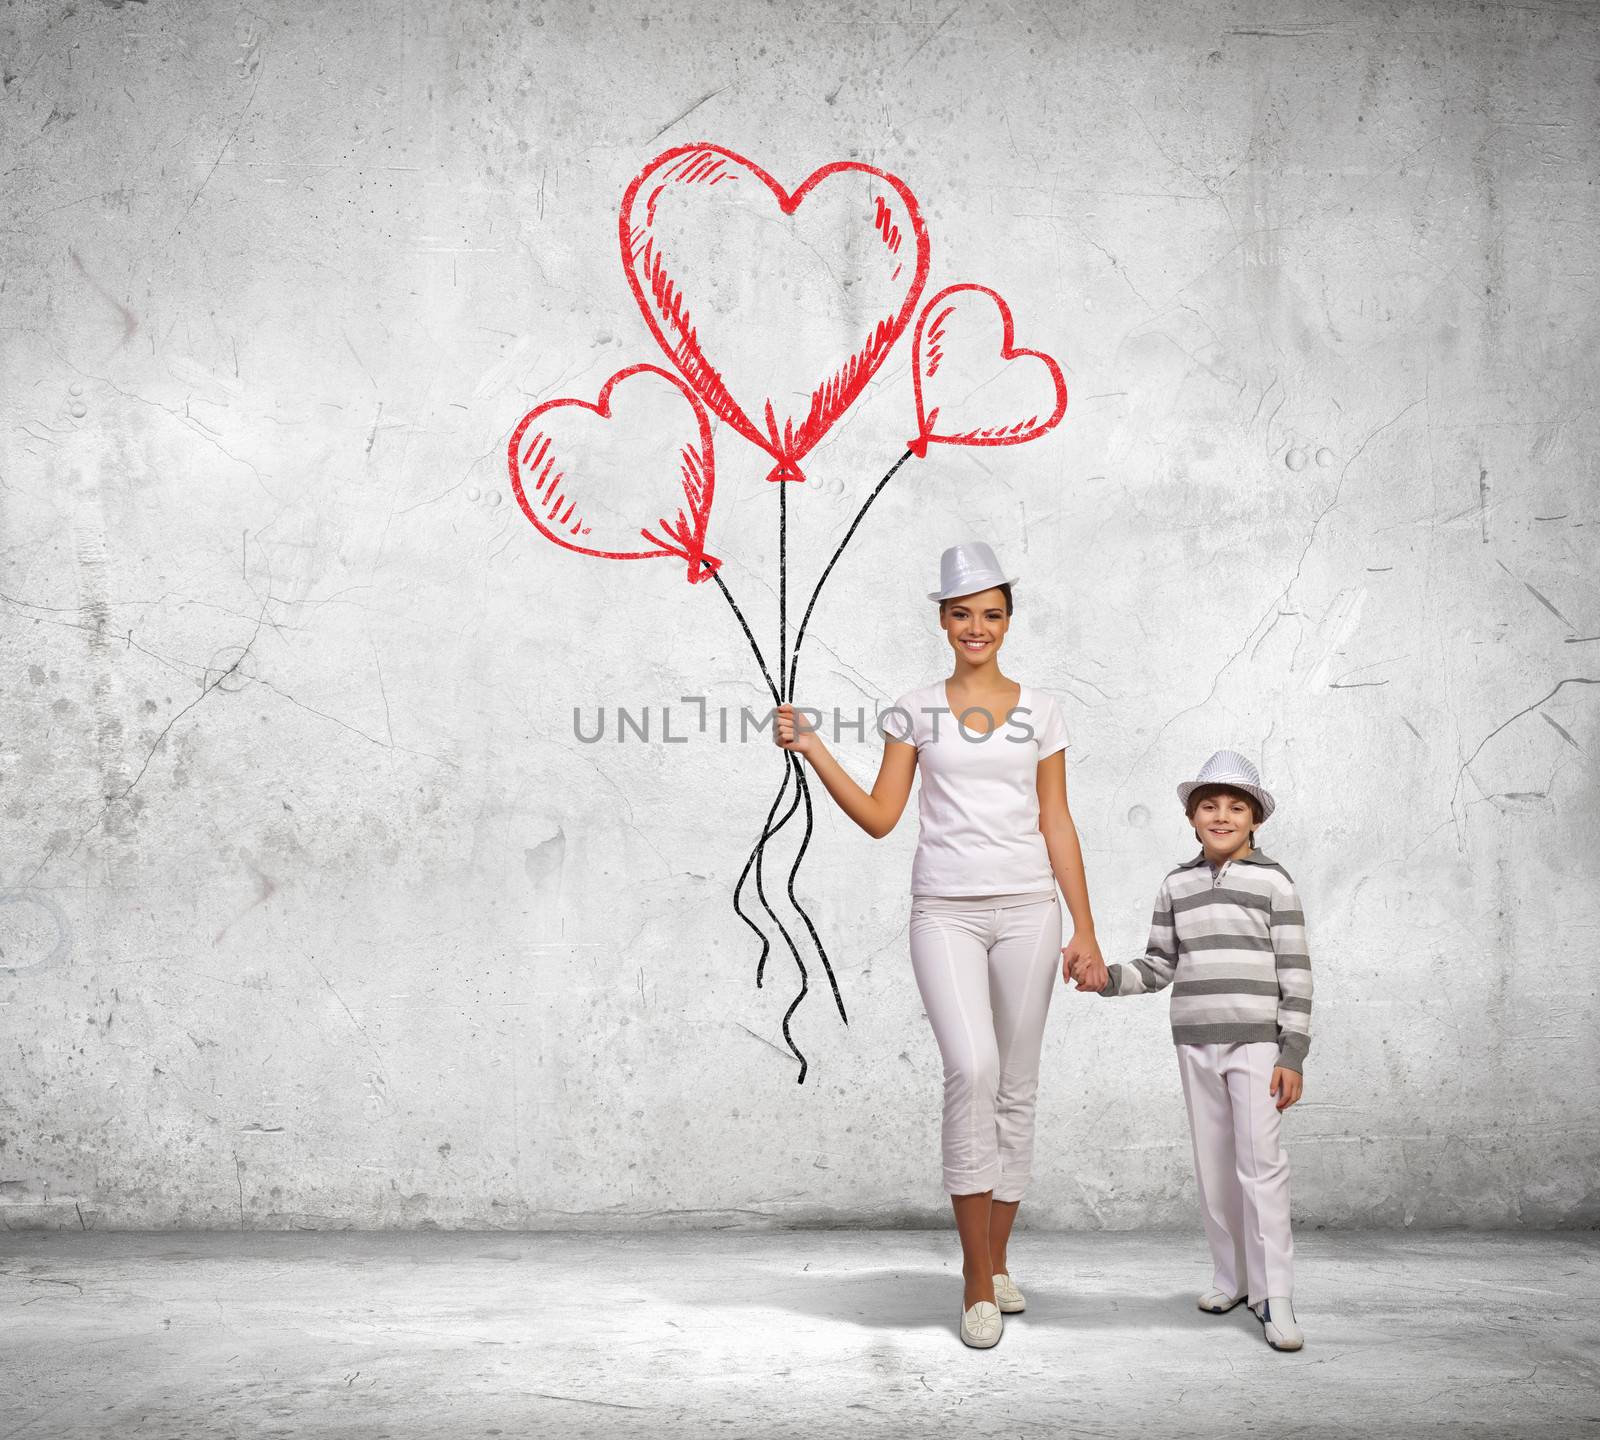 Image of mother and son holding bunch of colorful balloons